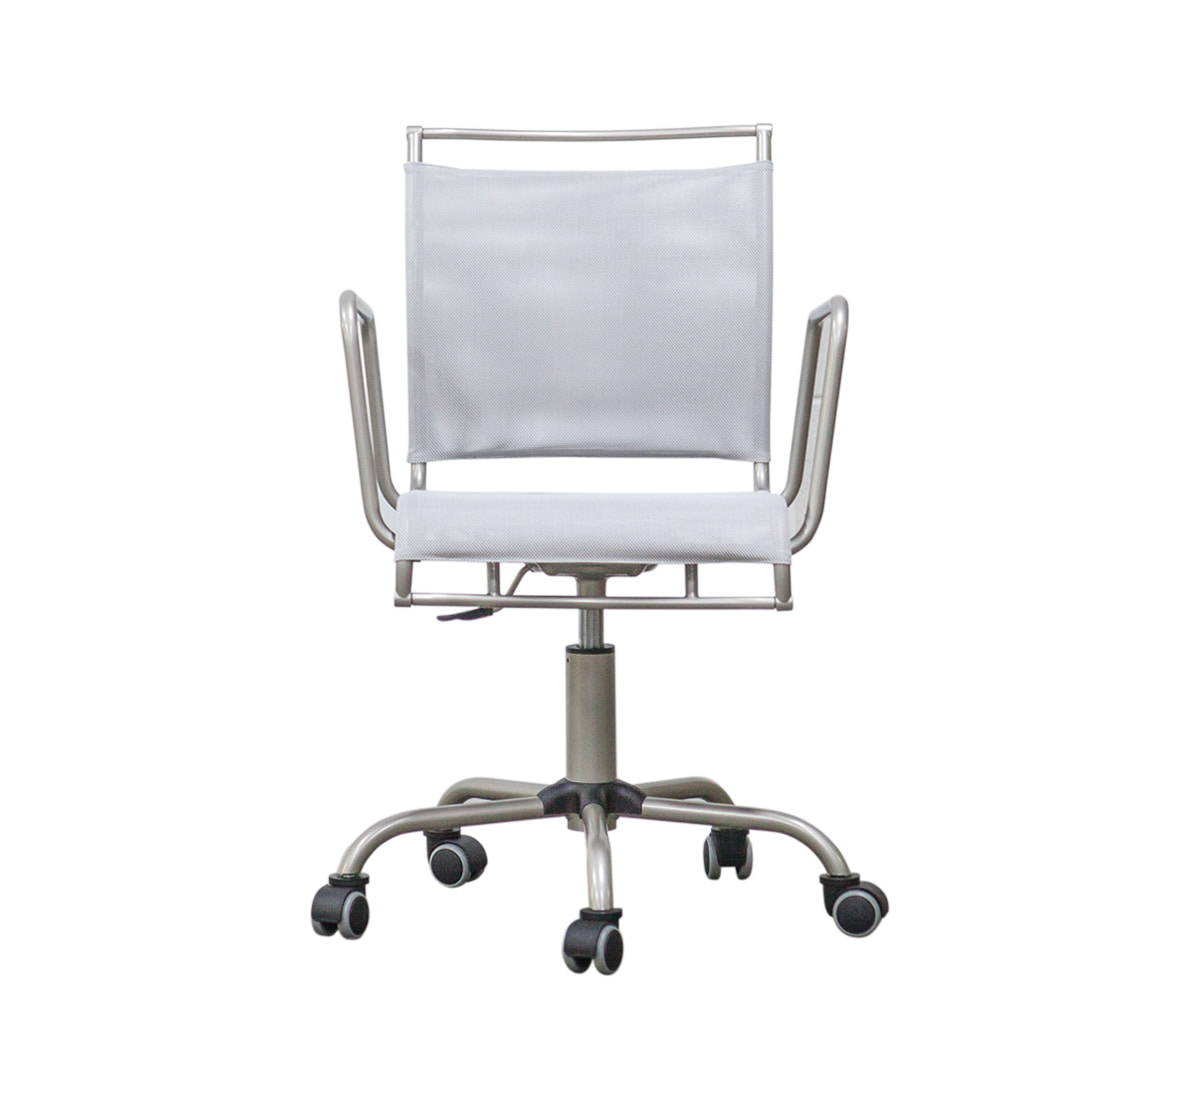 CONNUBIA BY CALLIGARIS Home Office Chair  홈 오피스 체어 (라이트 그레이)MADE IN ITALY